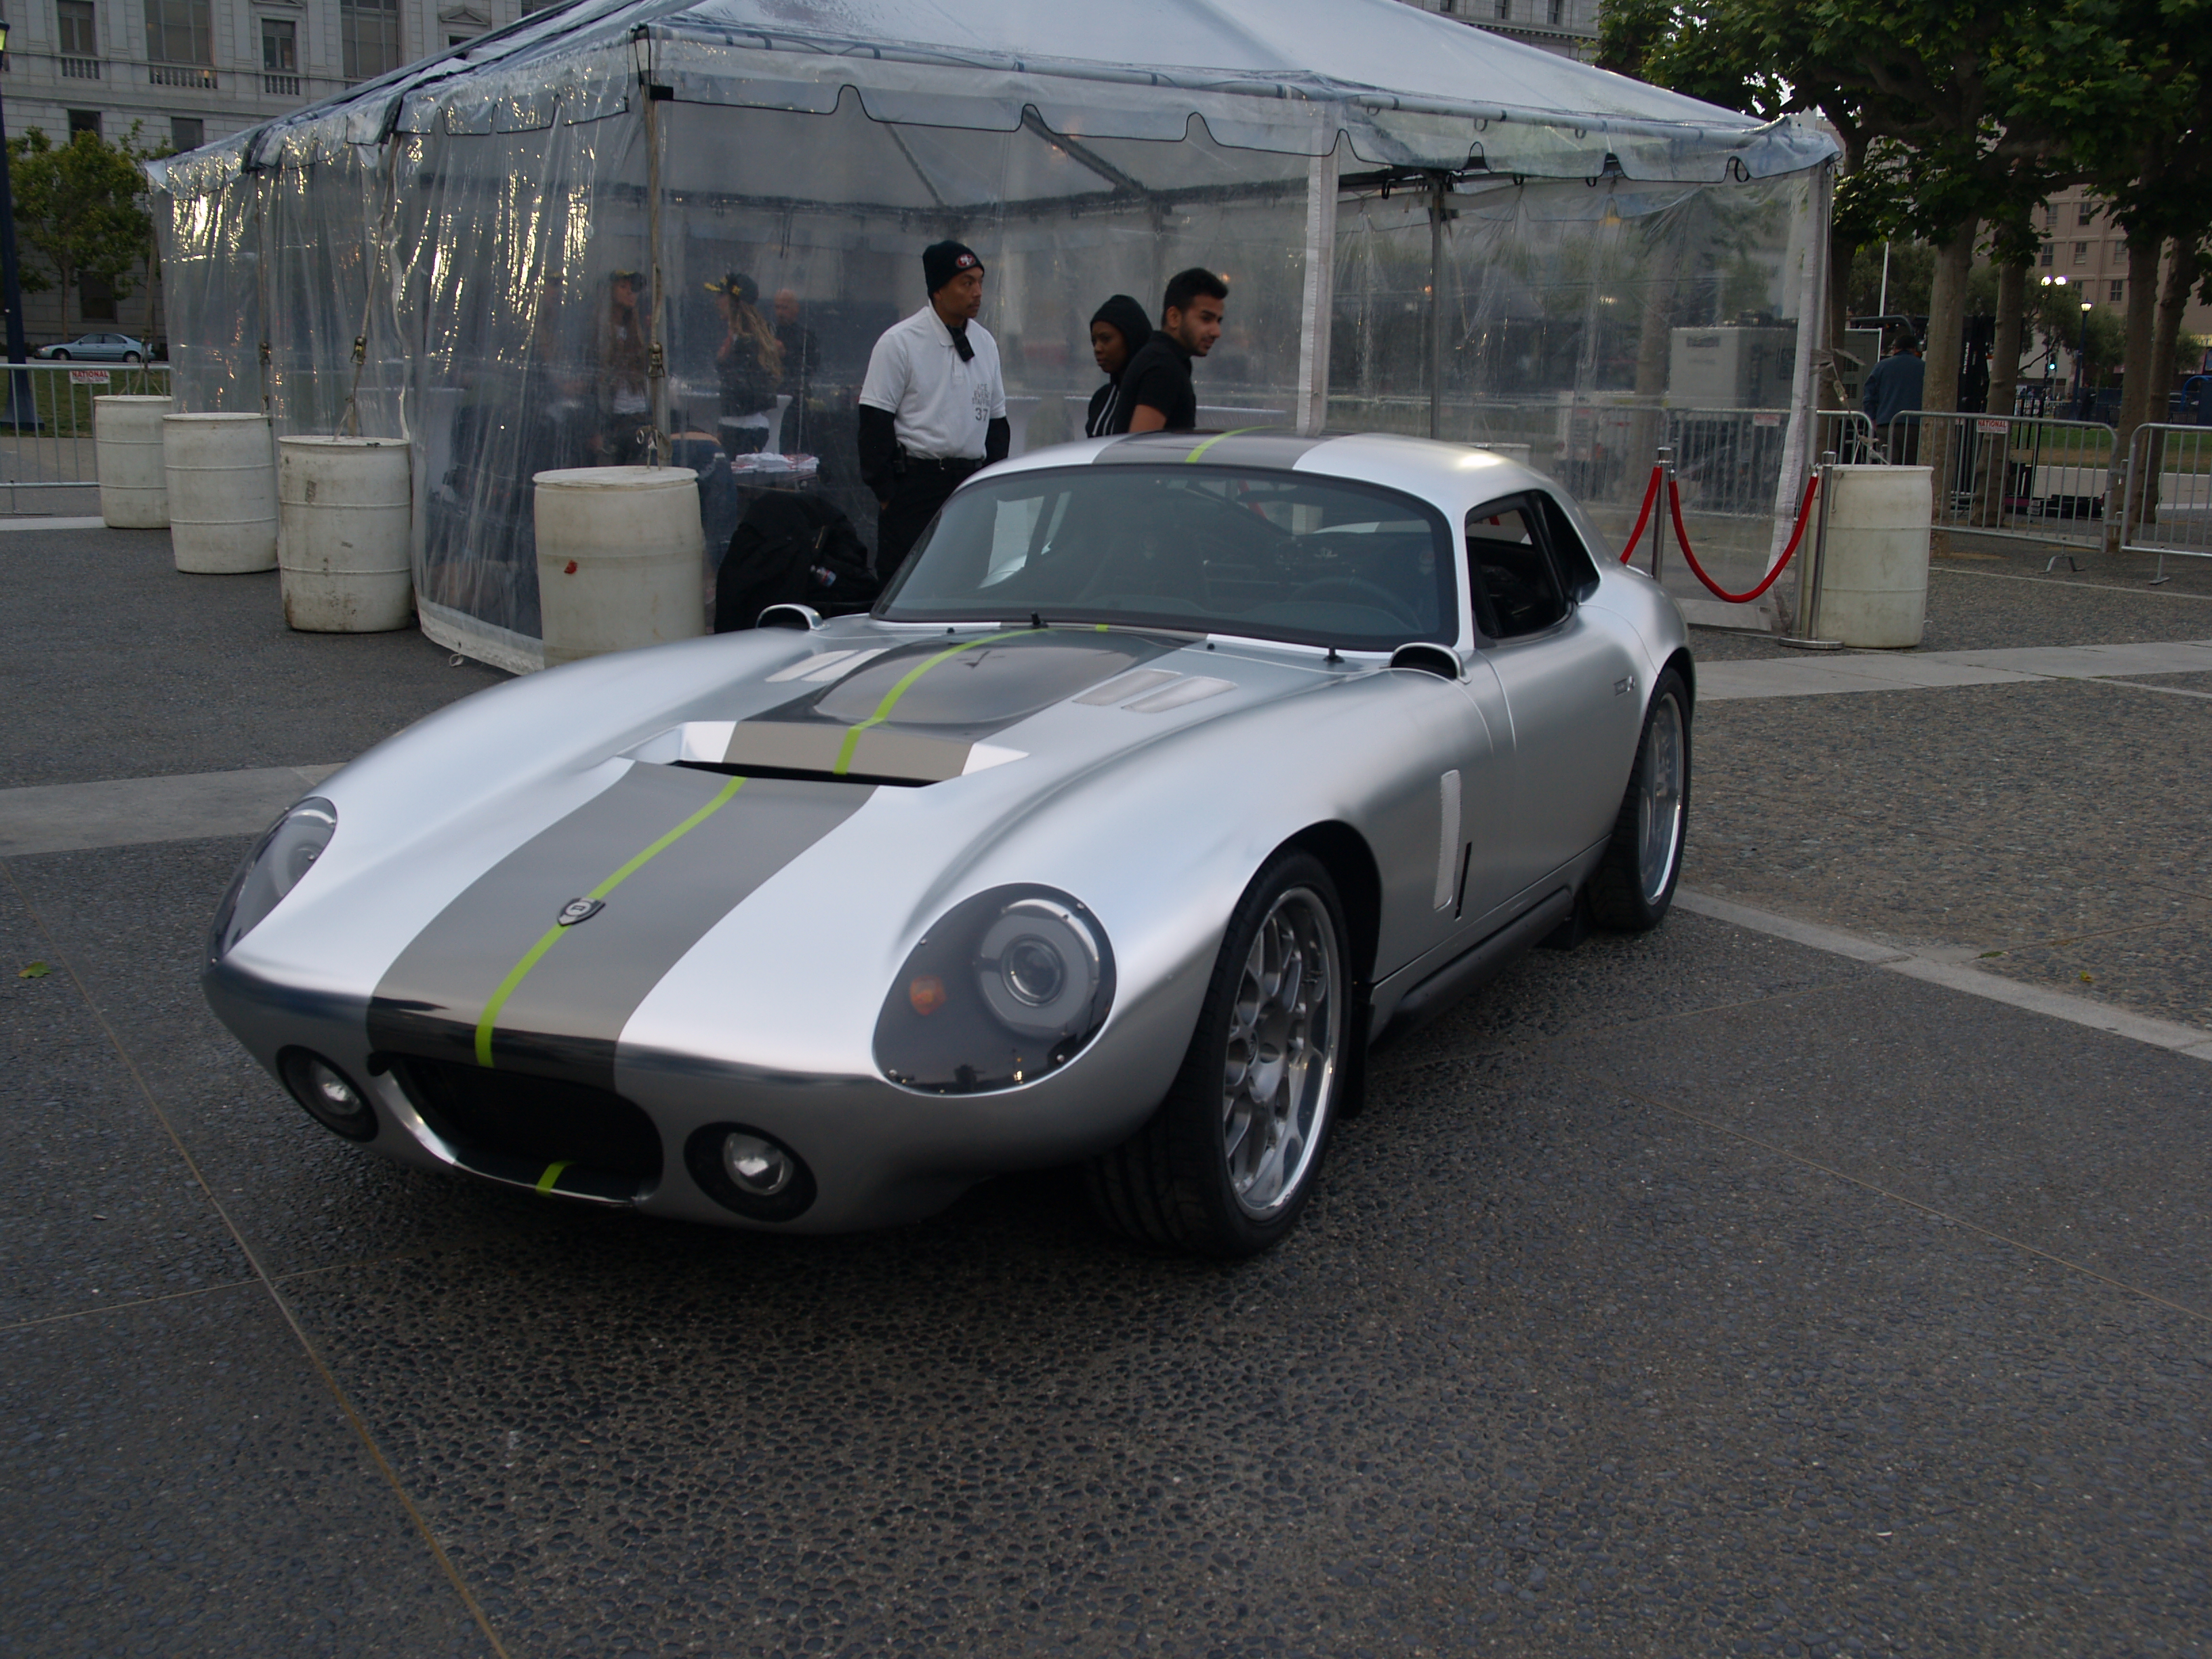 A Renovo Motors Coupe at the 2015 Gumball3000 checkpoint in San Francisco's Civic Center Plaza.  (Photo: Gregg Rosenblum)